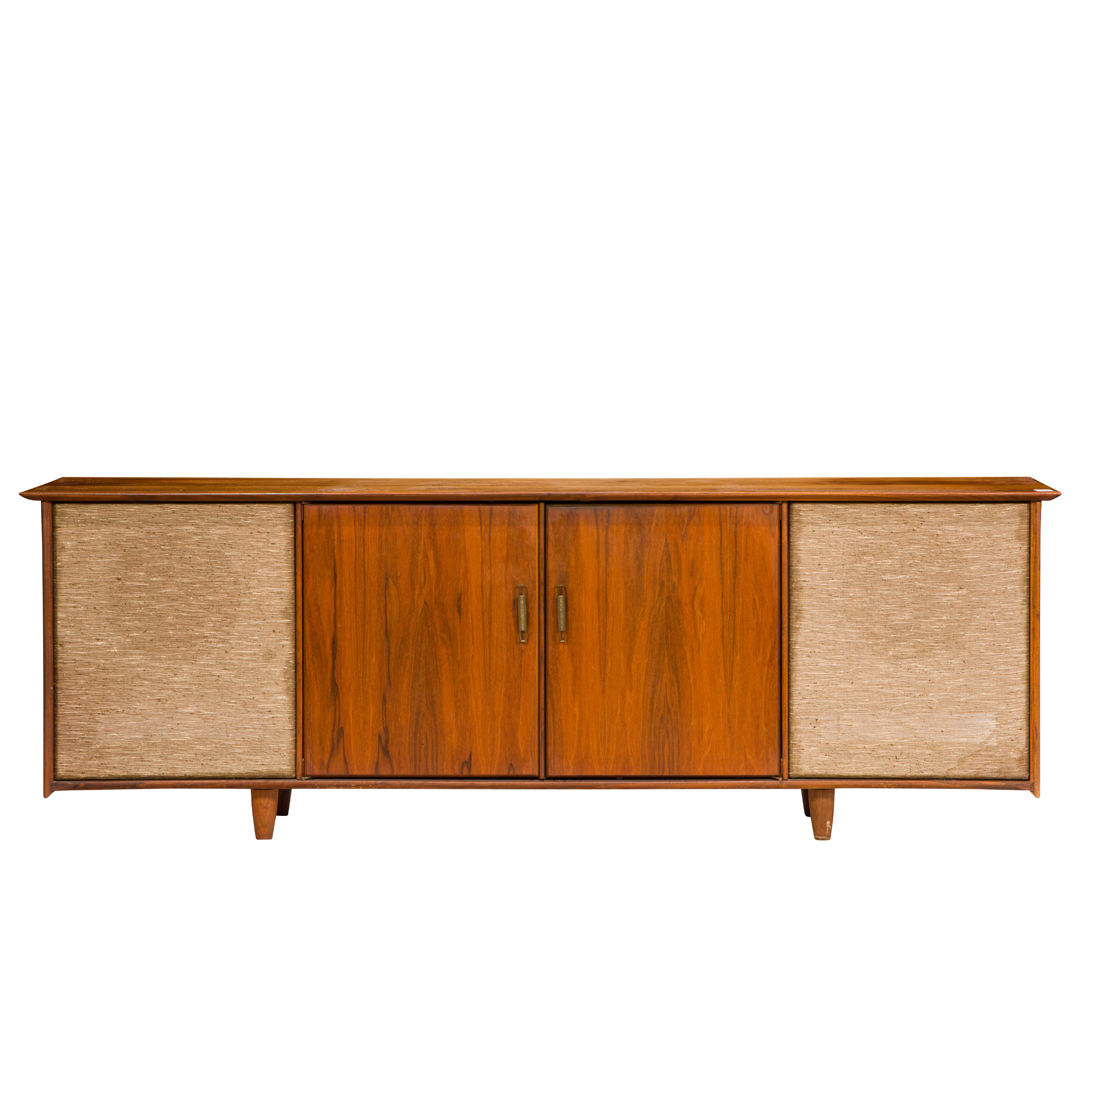 MID CENTURY MODERN STEREO CREDENZA 3a17ff